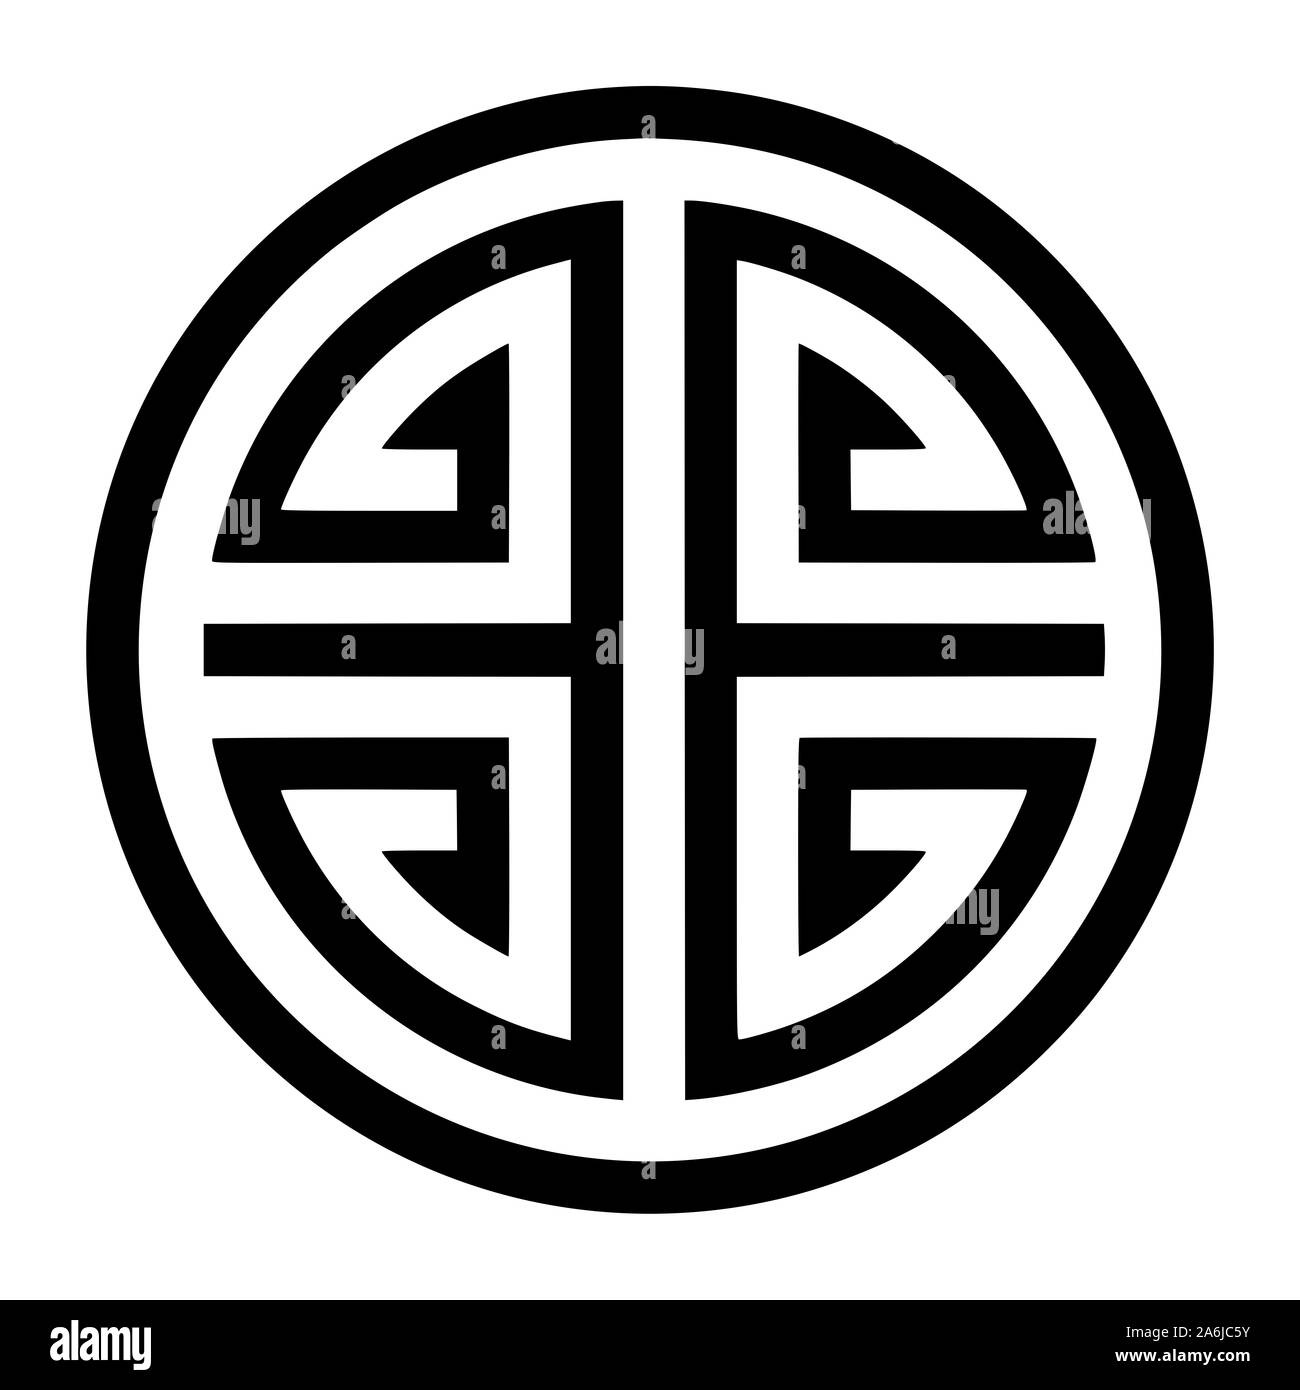 Chinese Good Luck Symbols And Meanings